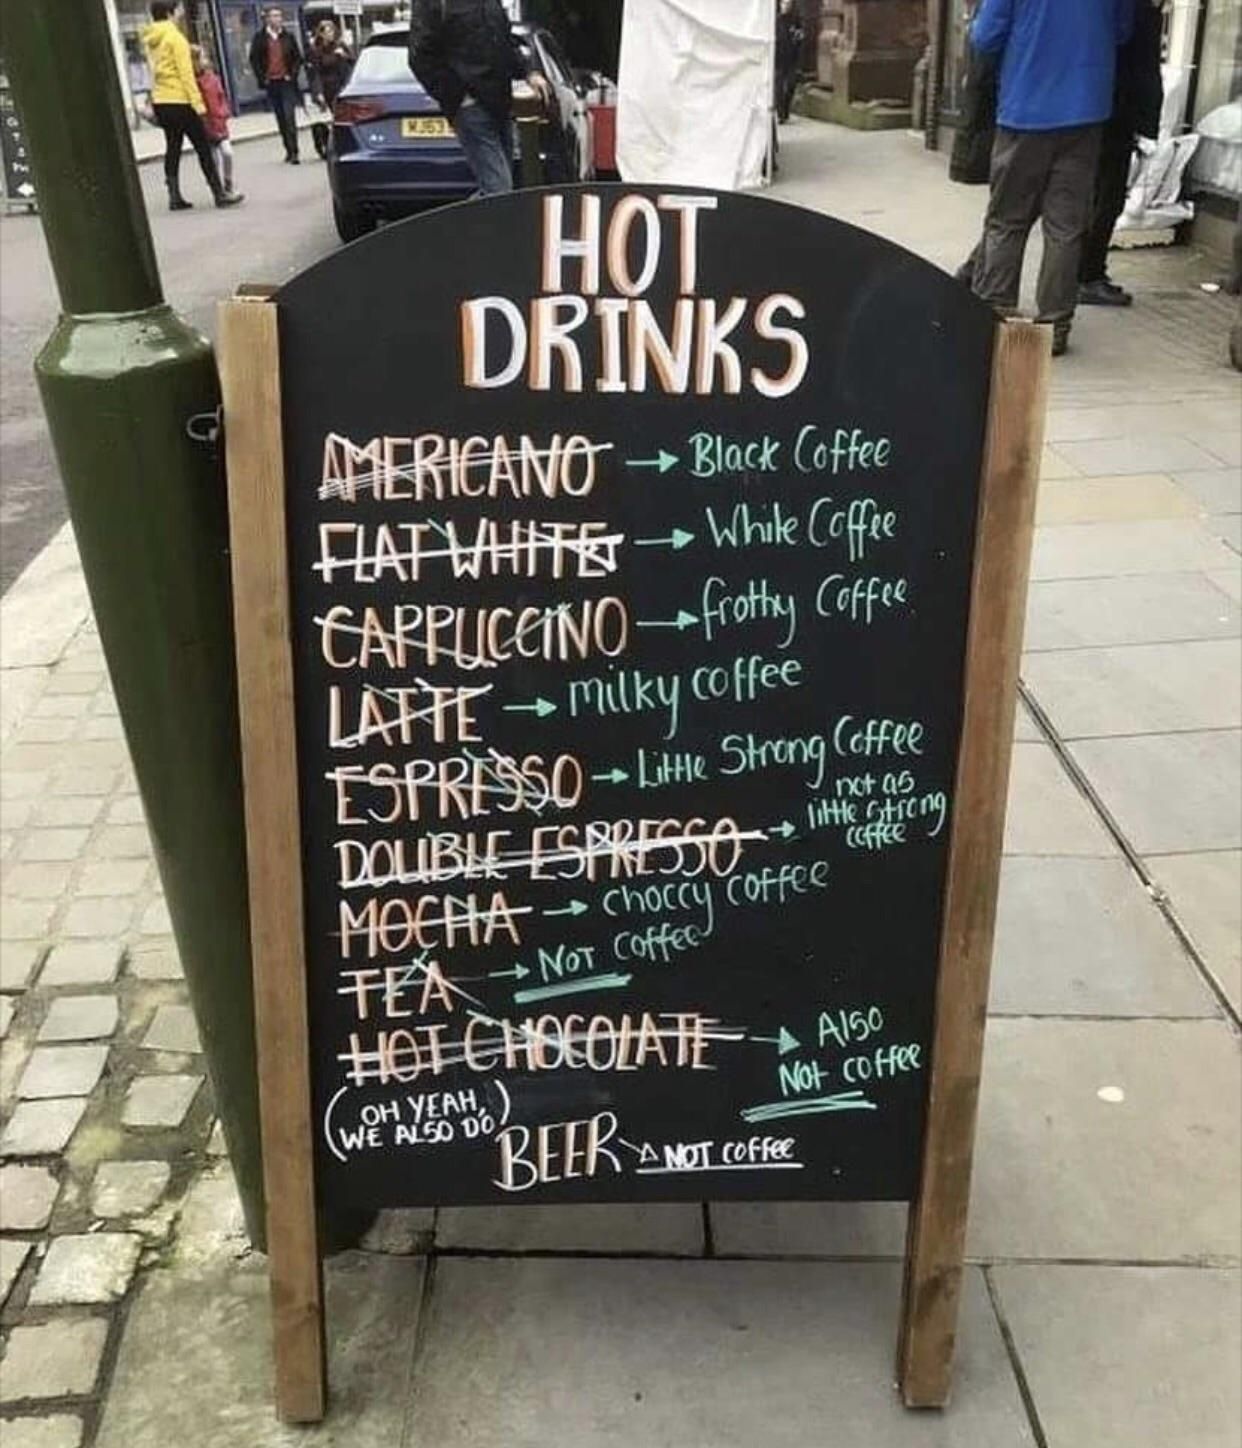 For those coffee amateurs...